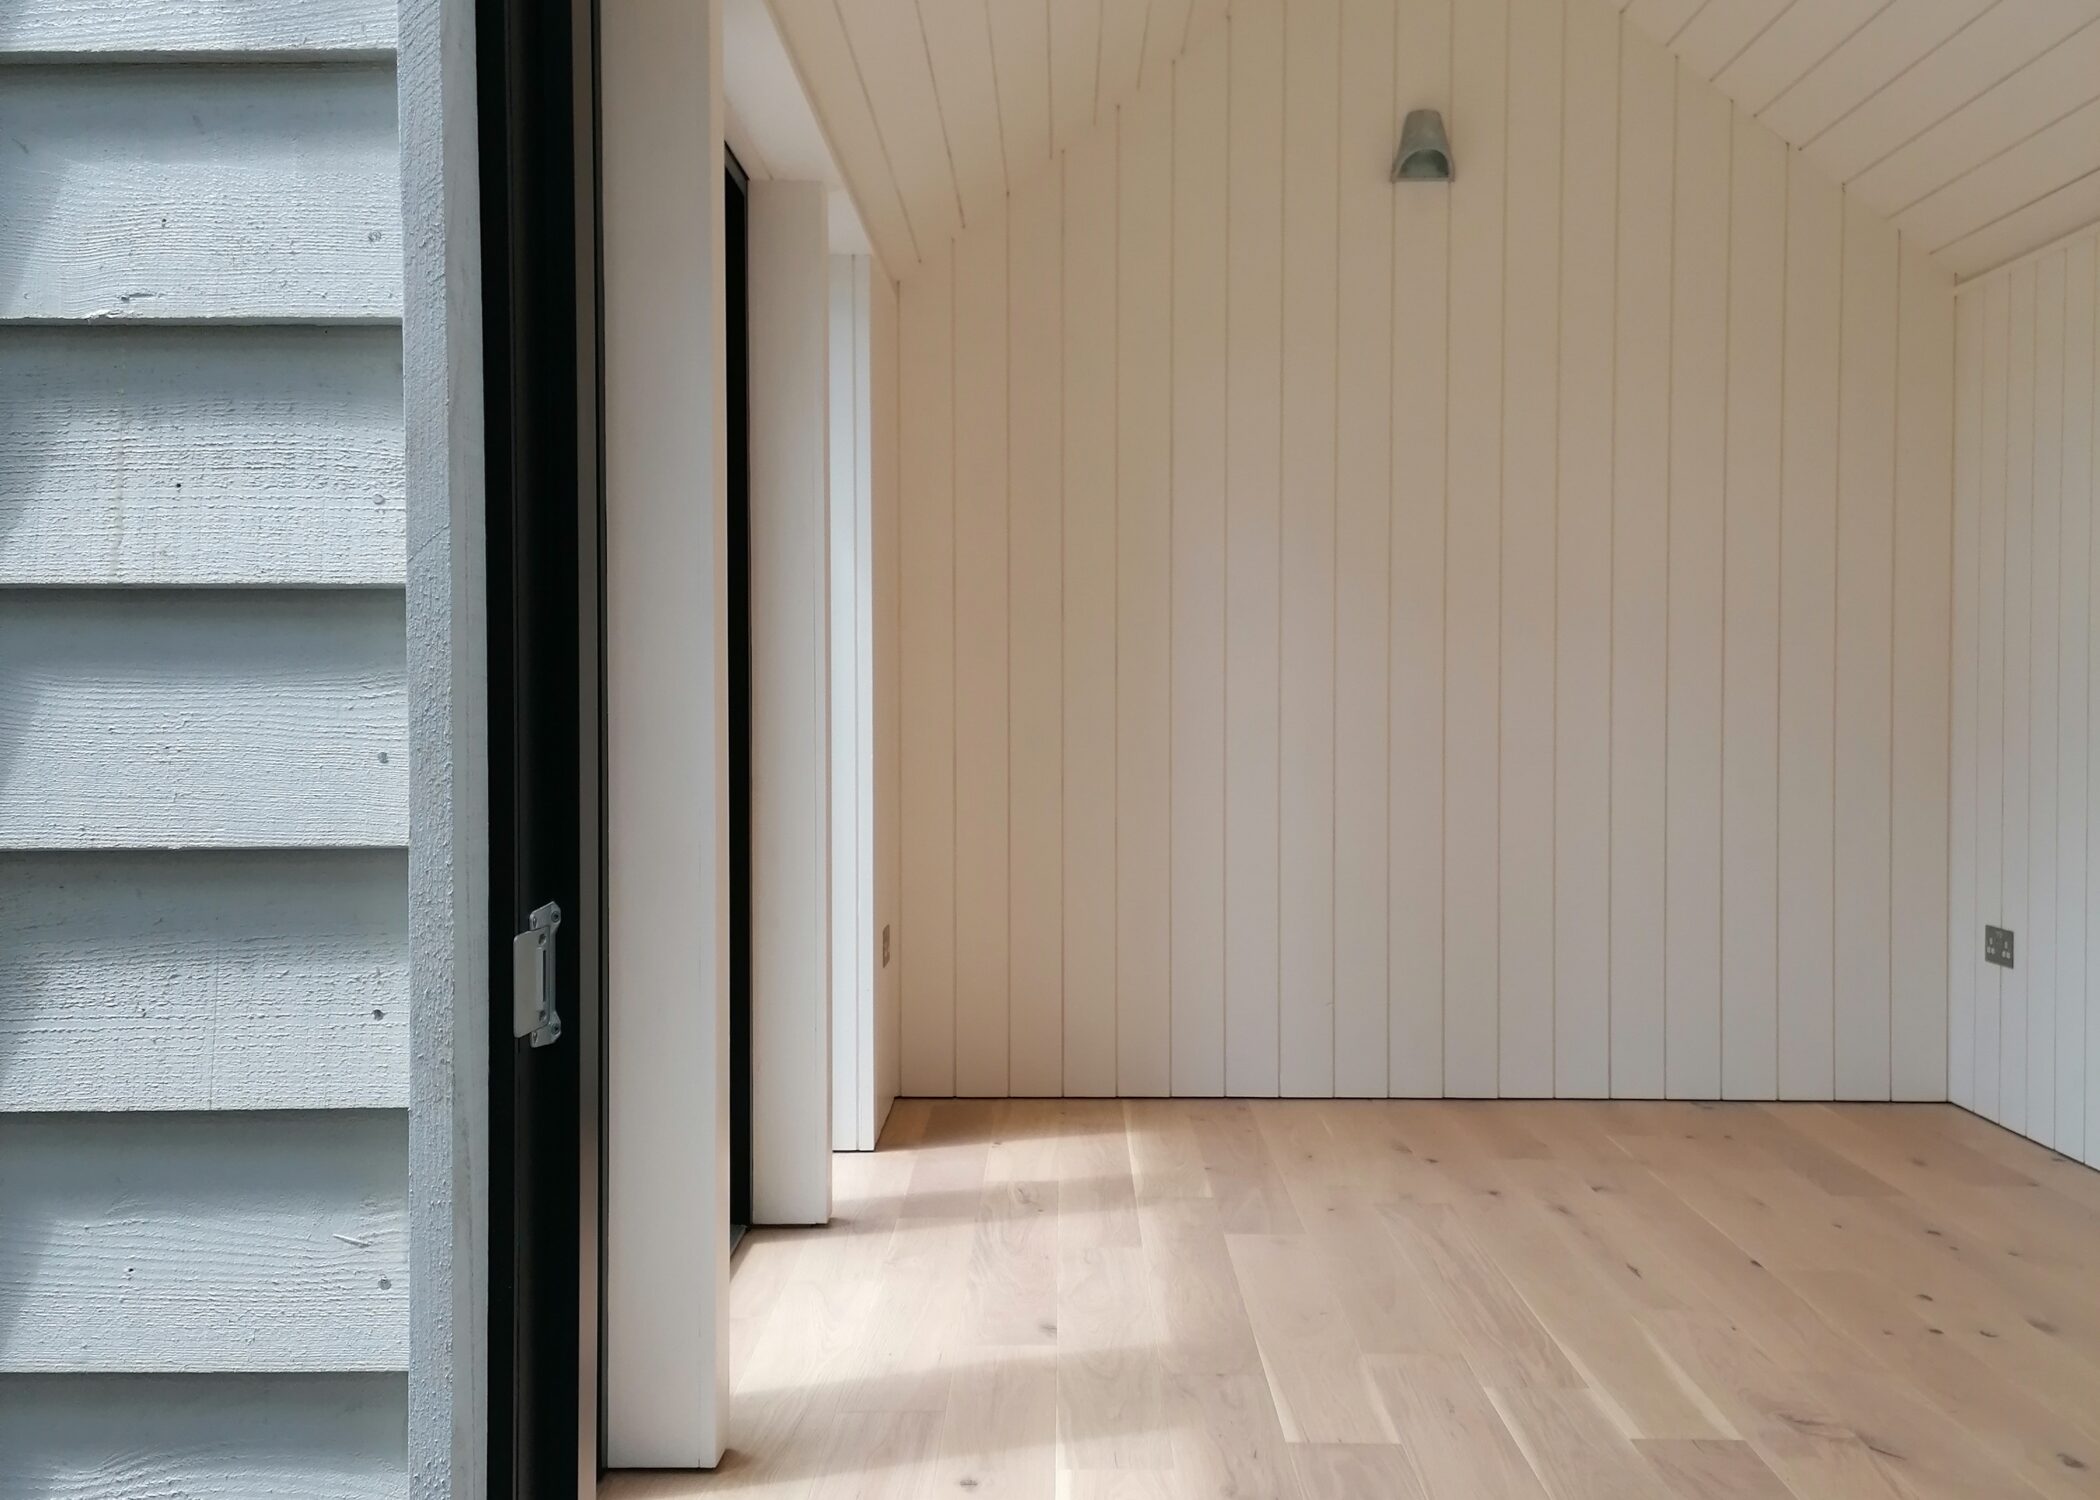 Tamar Cabin. A summerhouse cabin with engineered oak flooring and painted Farrow and Ball Wimborne White timber t&g cladding _Life Space Cabins.jpg